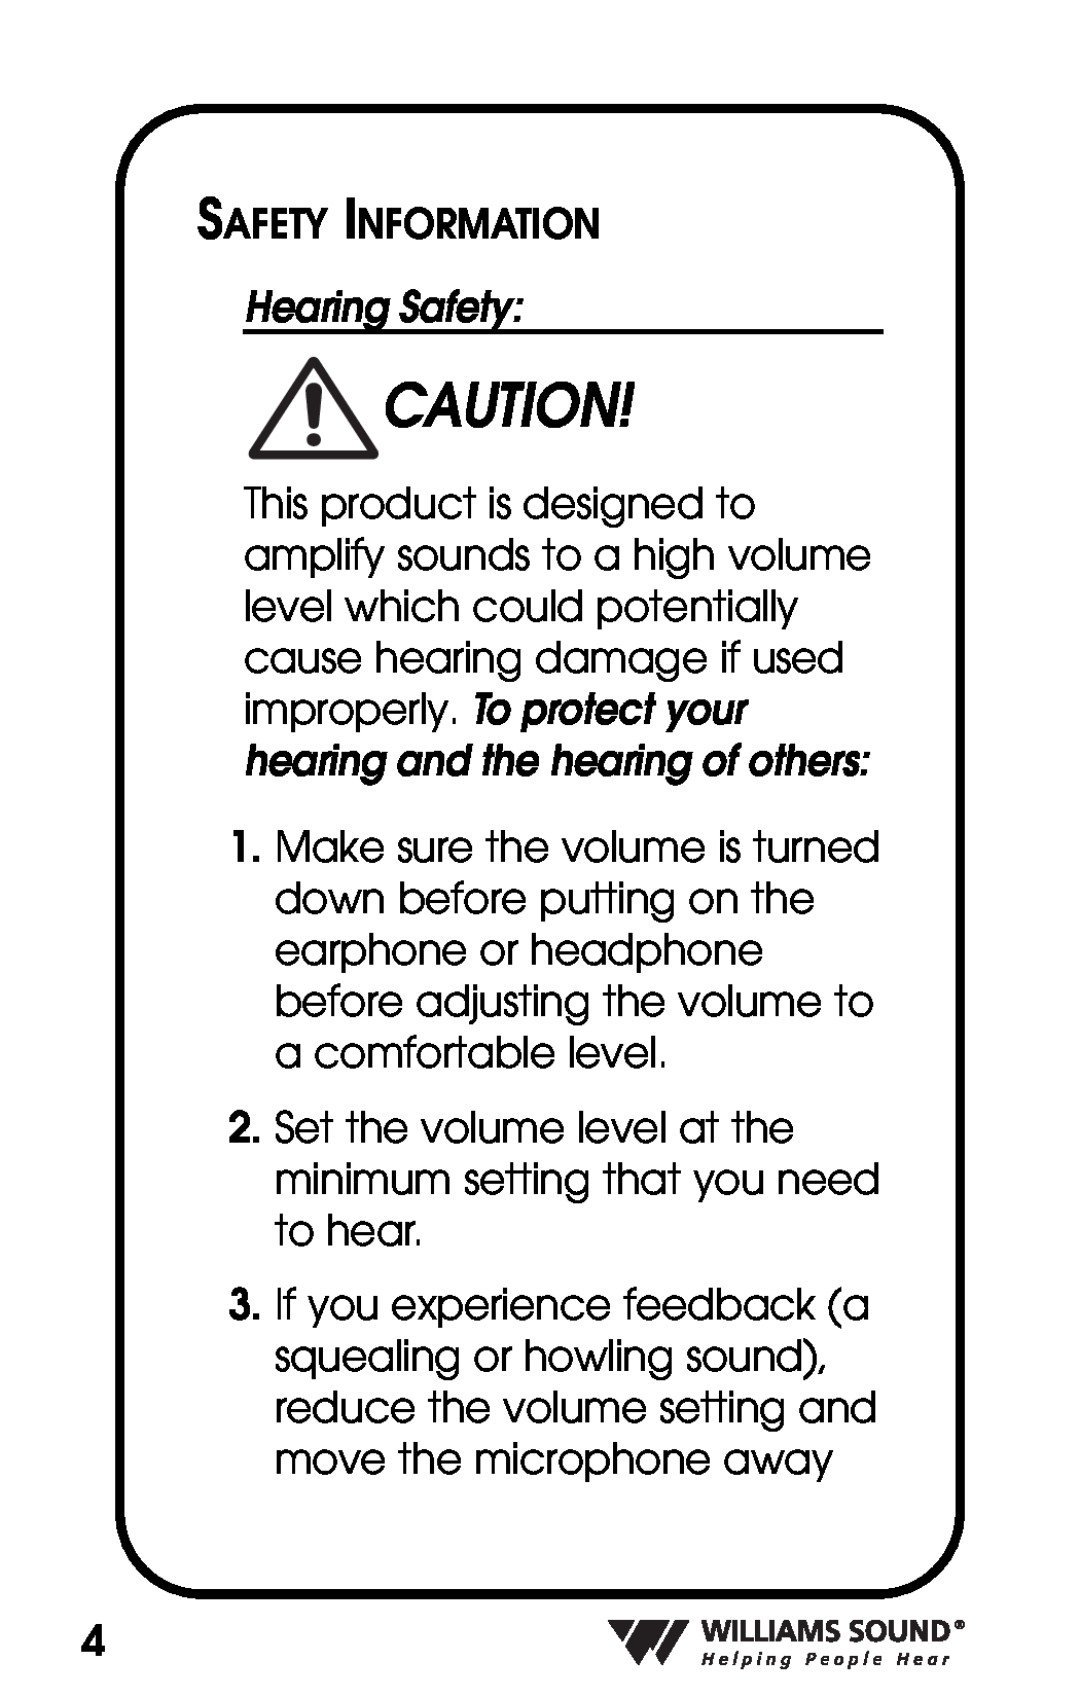 Williams Sound PKT D1 manual Safety Information 